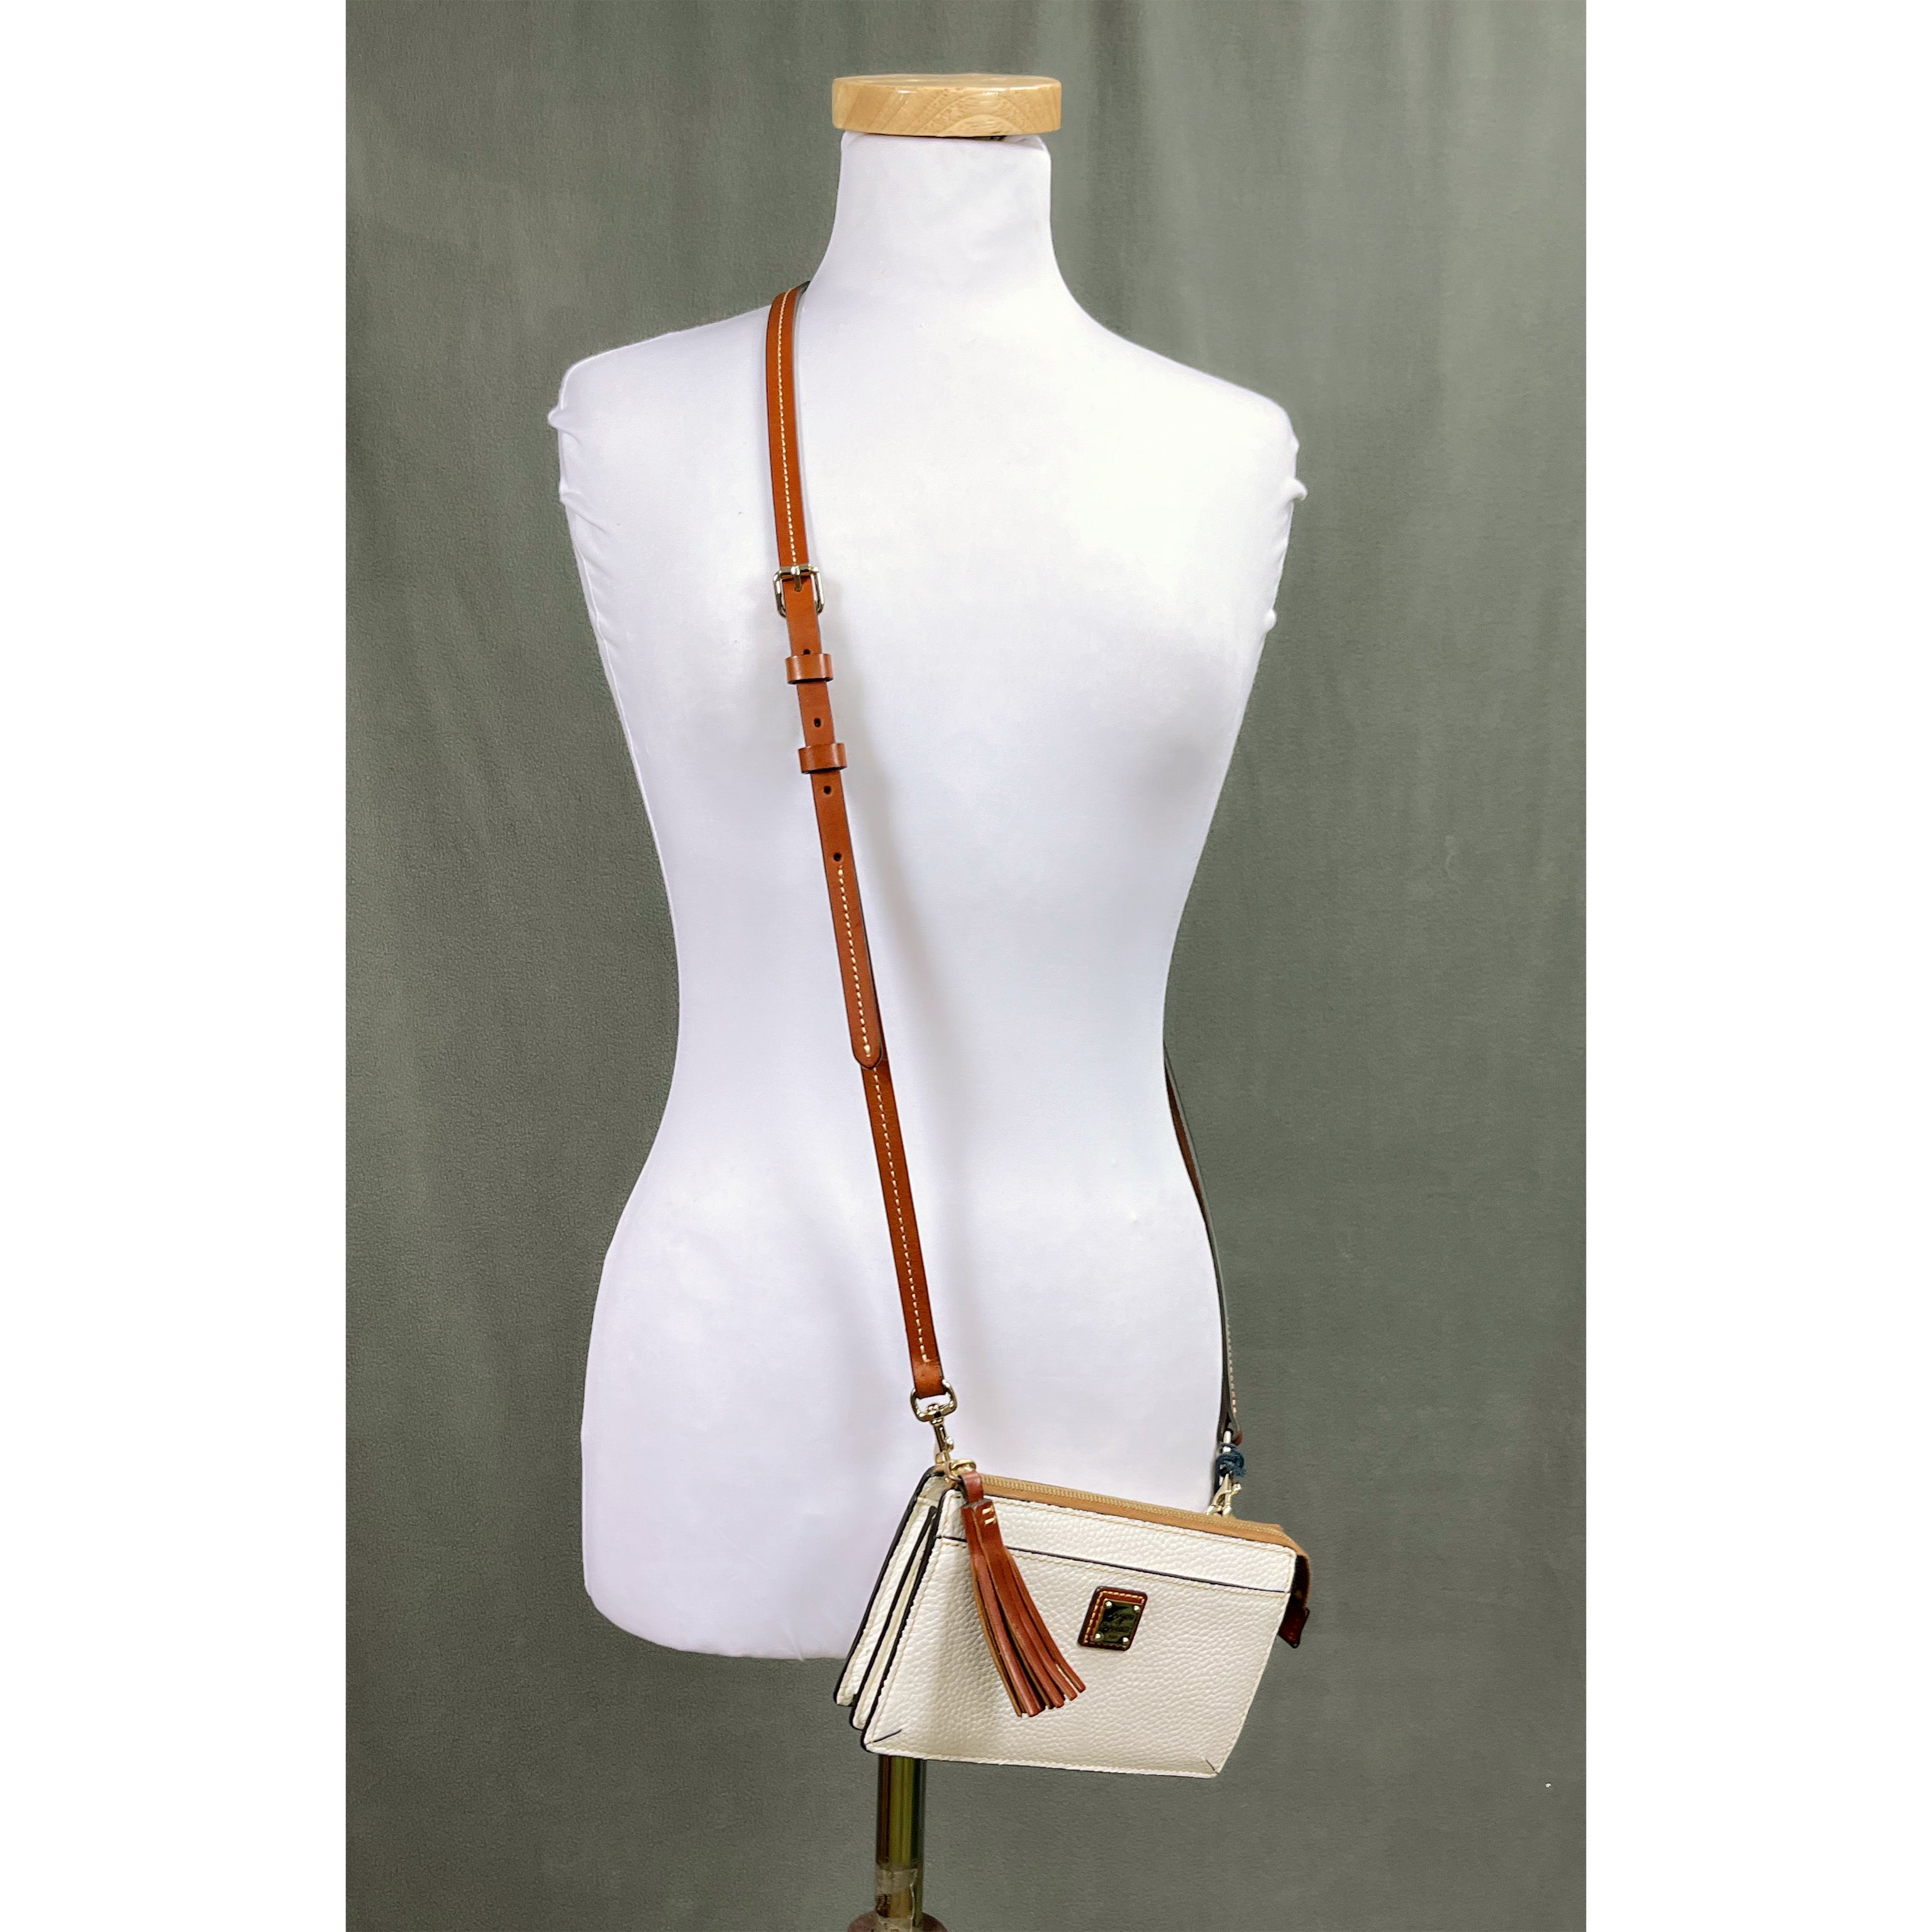 Dooney & Bourke bone Gingy crossbody bag, NEW WITH TAGS!